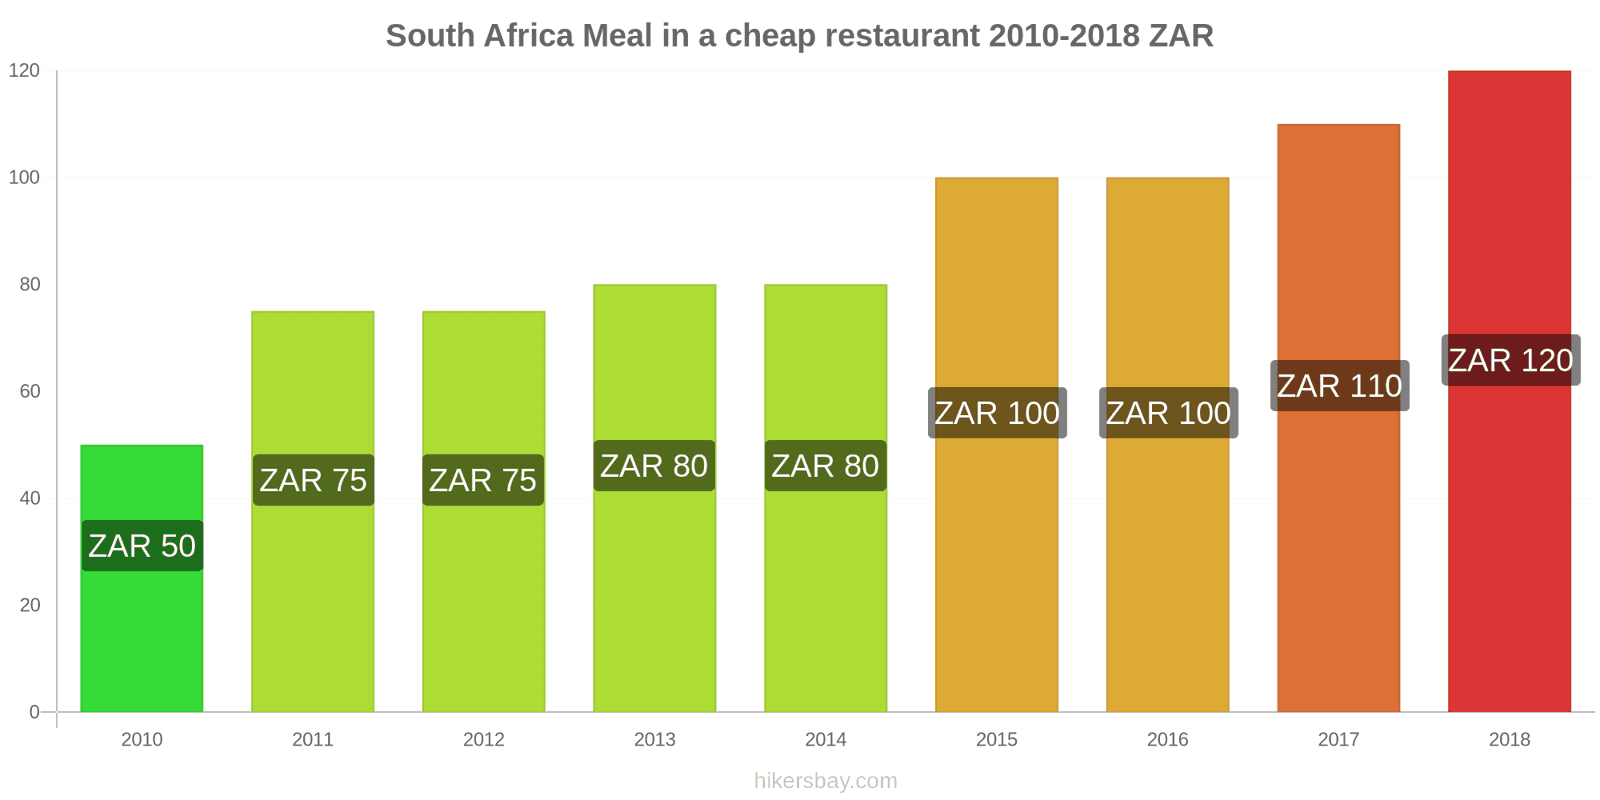 South Africa price changes Meal in a cheap restaurant hikersbay.com